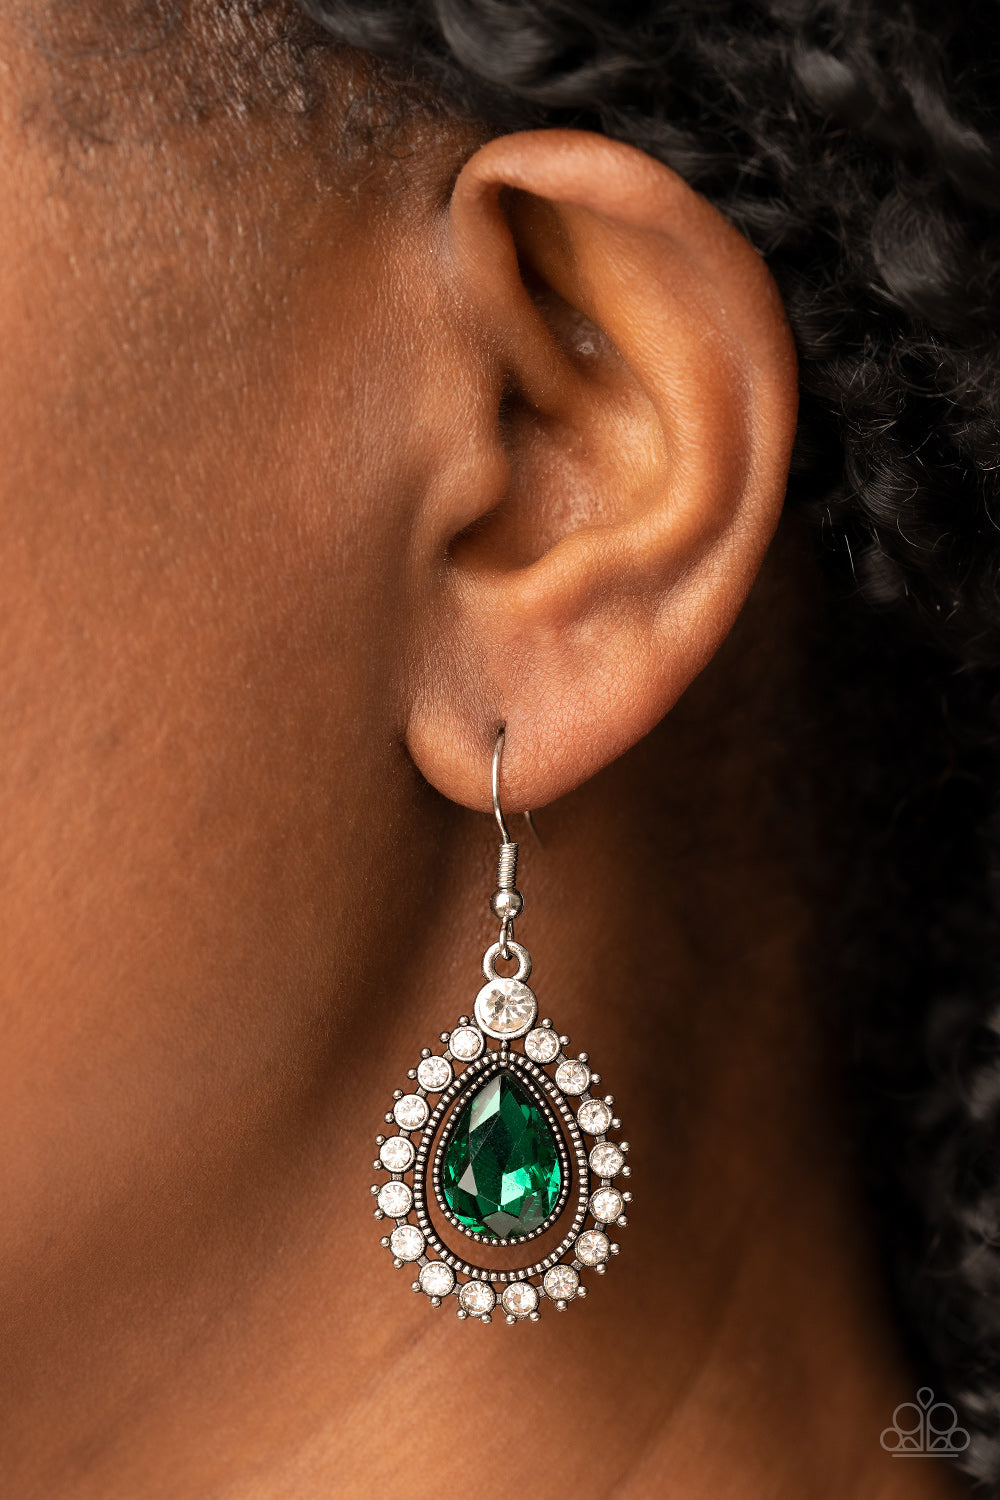 Divinely Duchess - Green Earrings - Paparazzi Accessories